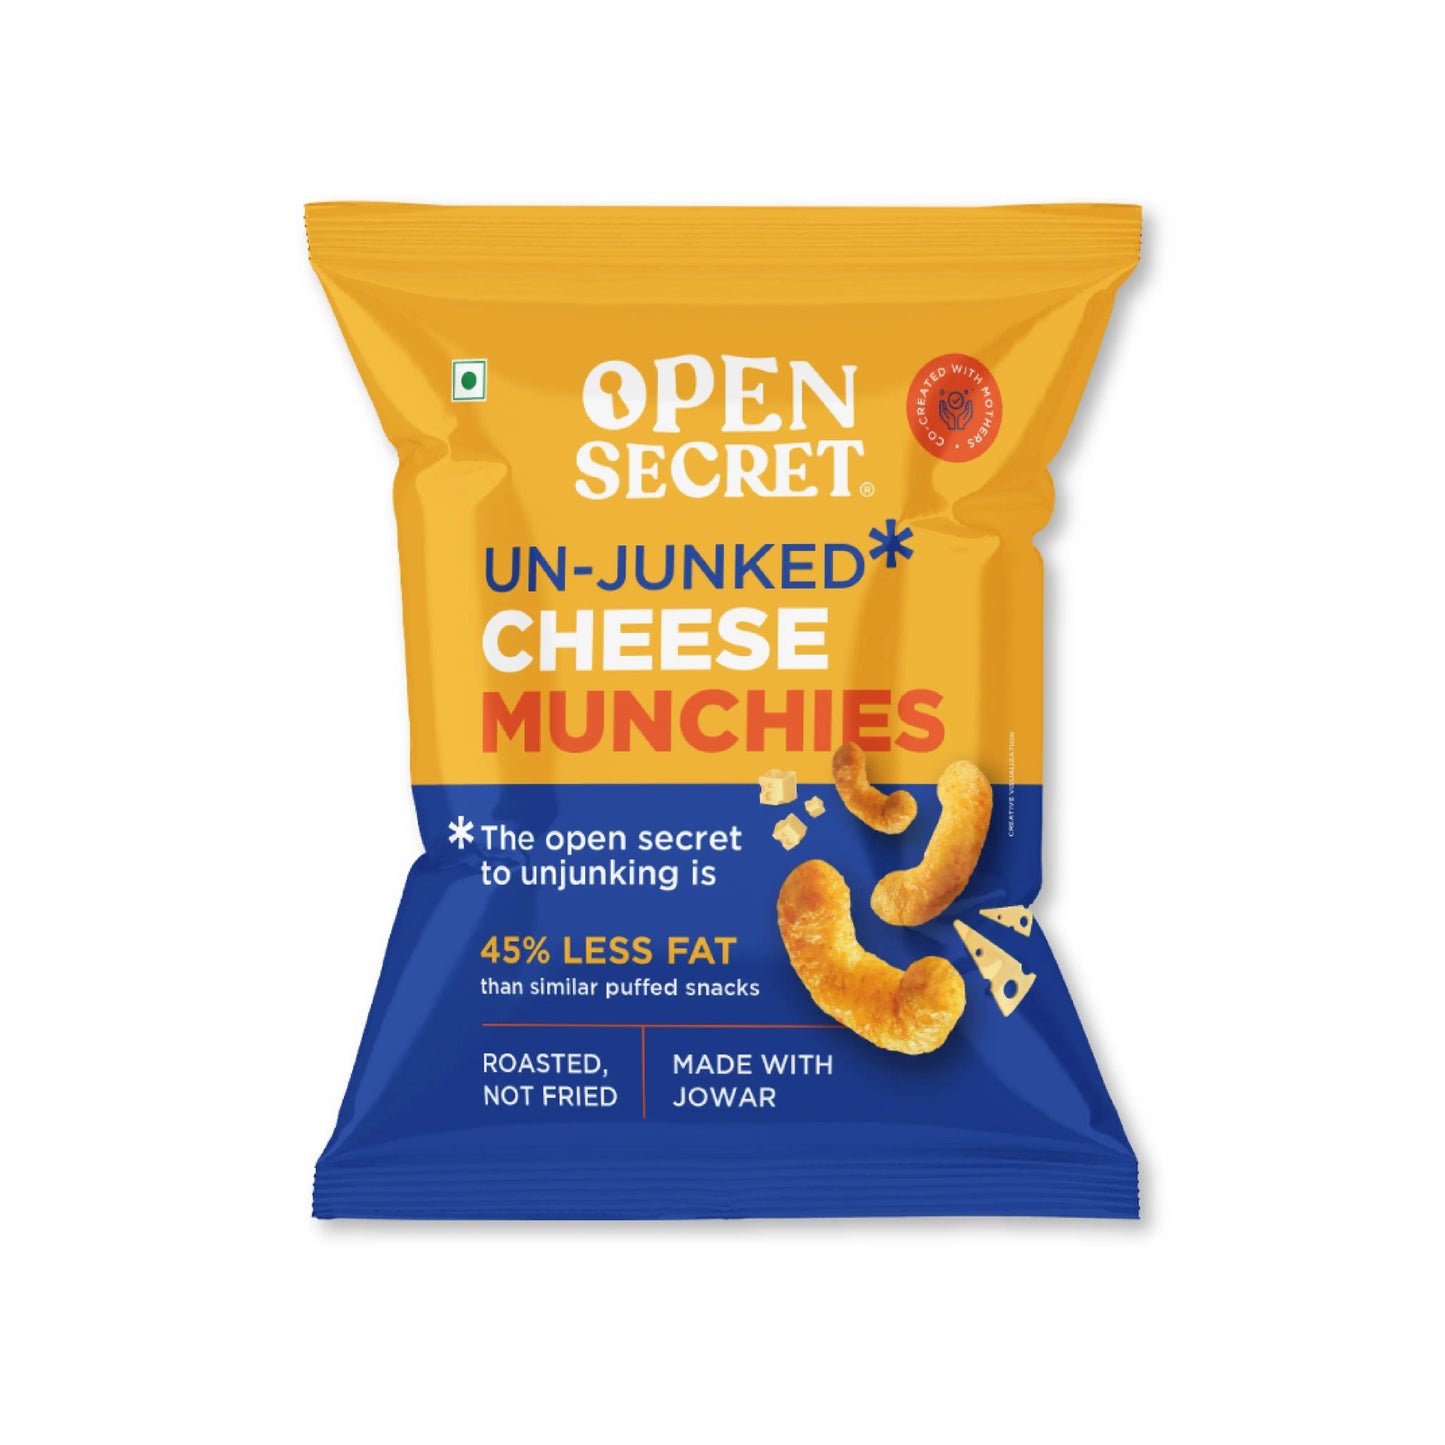 Open Secret UnJunked Cheese Munchies - Pack of 20